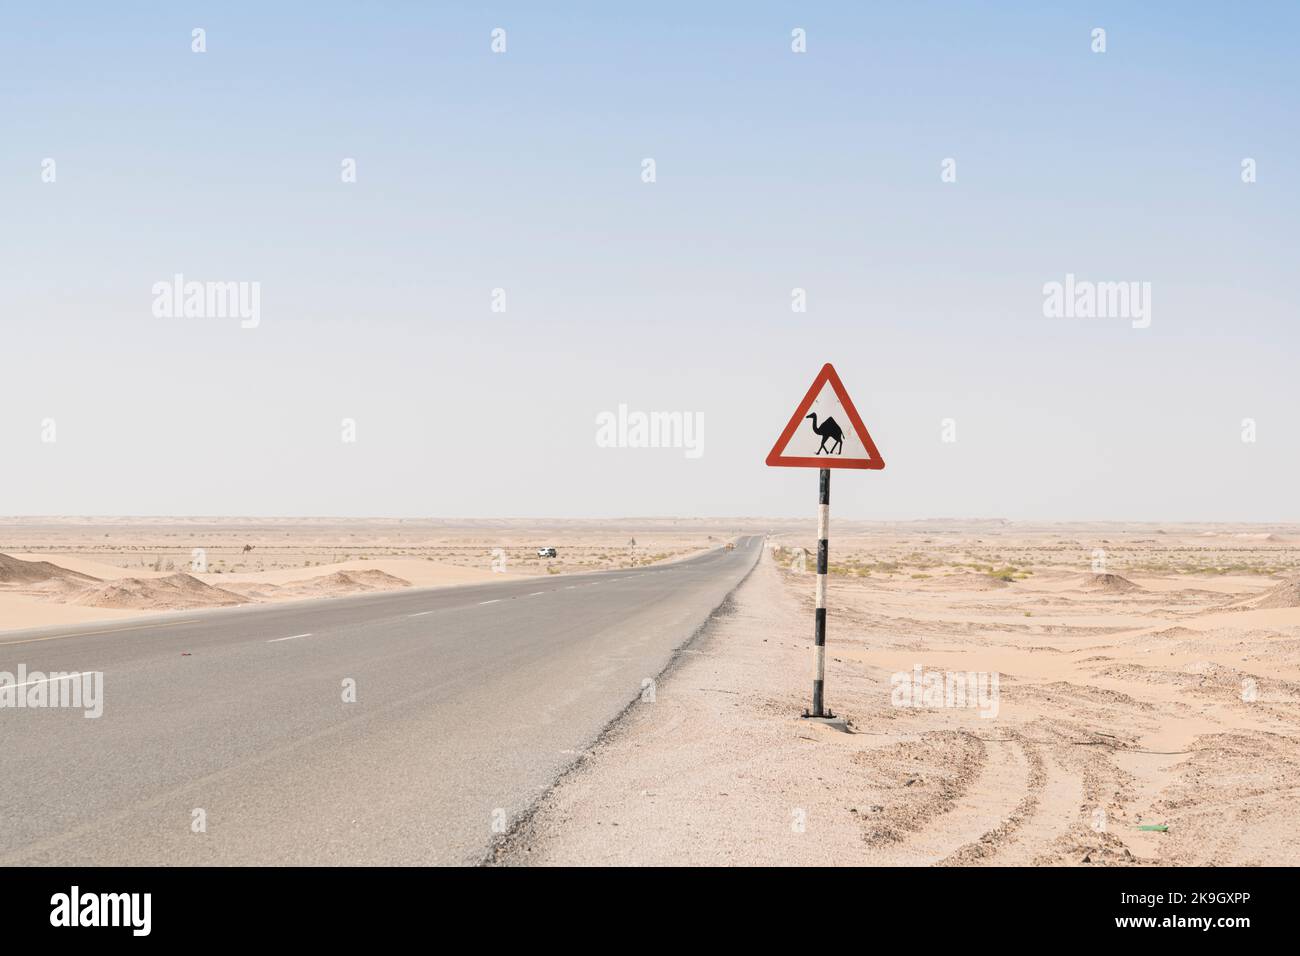 Sign warning of Camels crossing in a rural road in the desert of the Middle East with road going thru the a deserted area, copy space in the sky Stock Photo